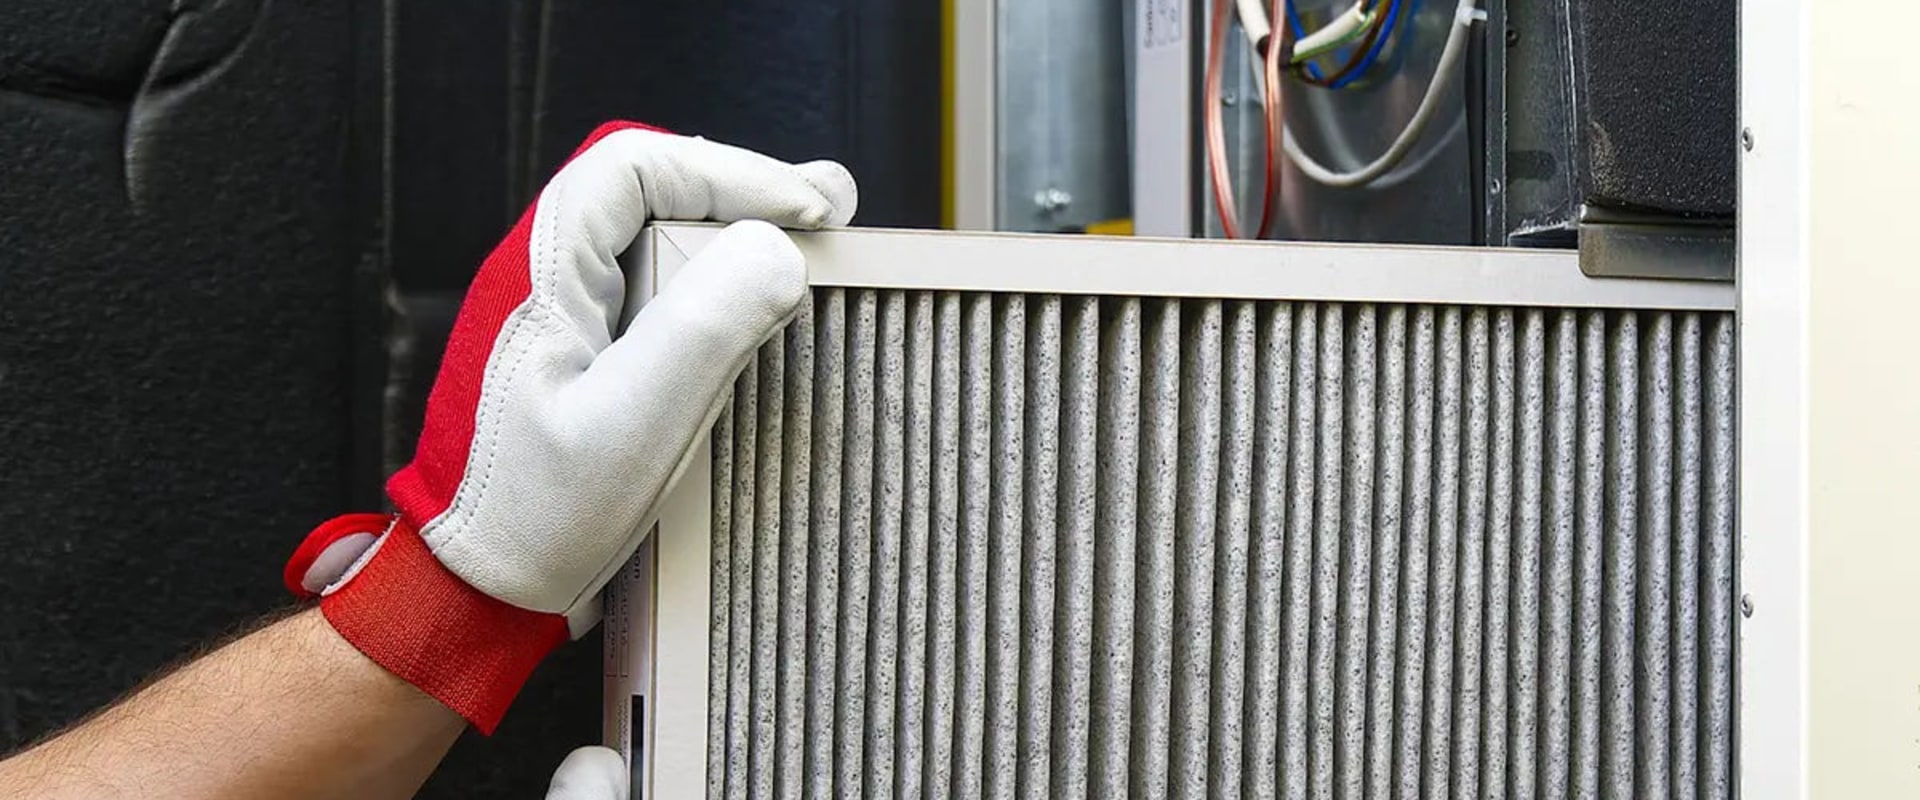 Discovering Top Pick and Best HVAC Replacement Air Filters